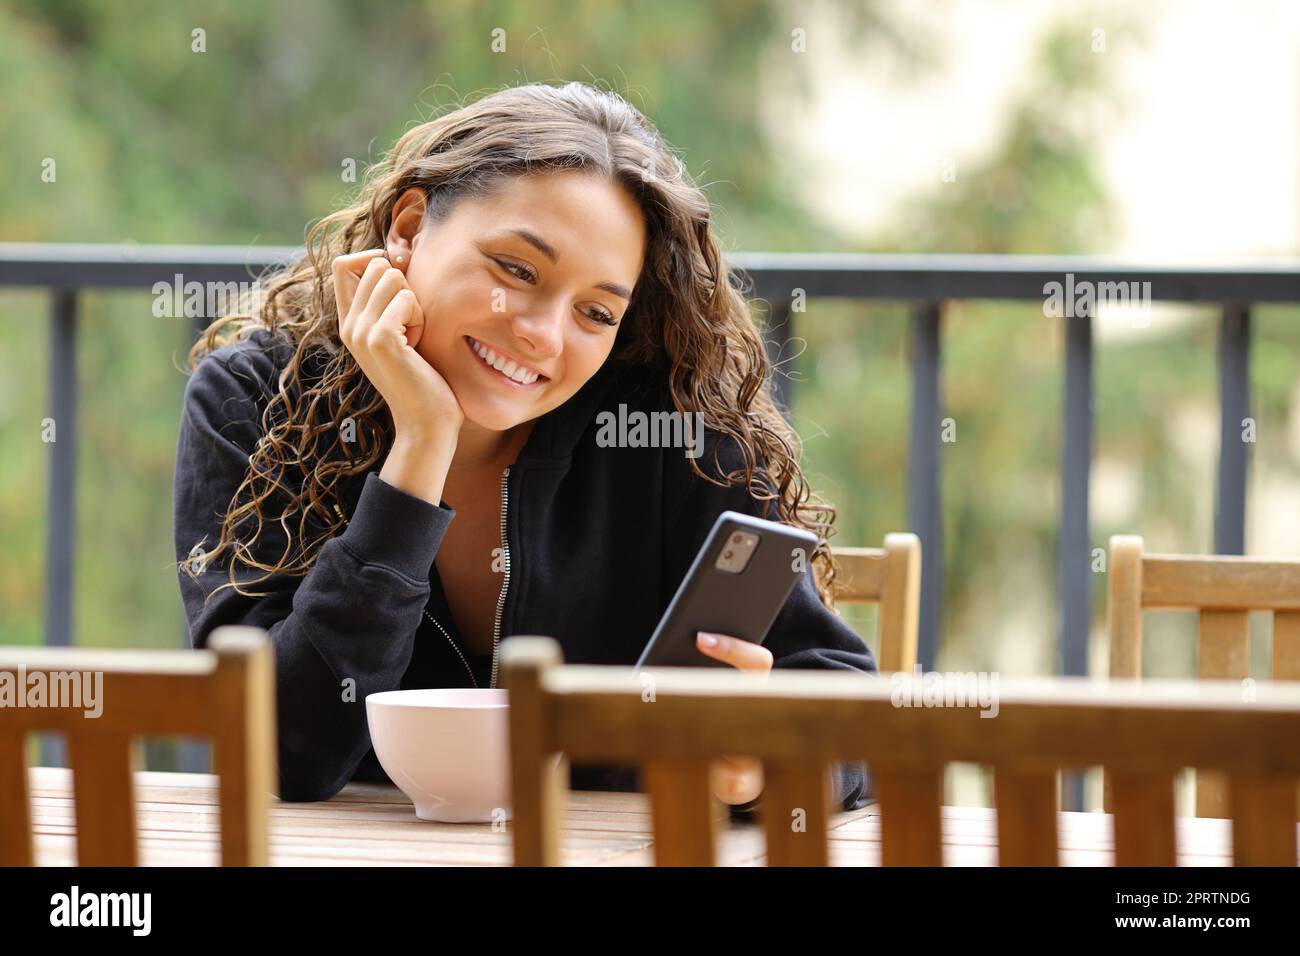 Woman in a balcony smiling using phone Stock Photo